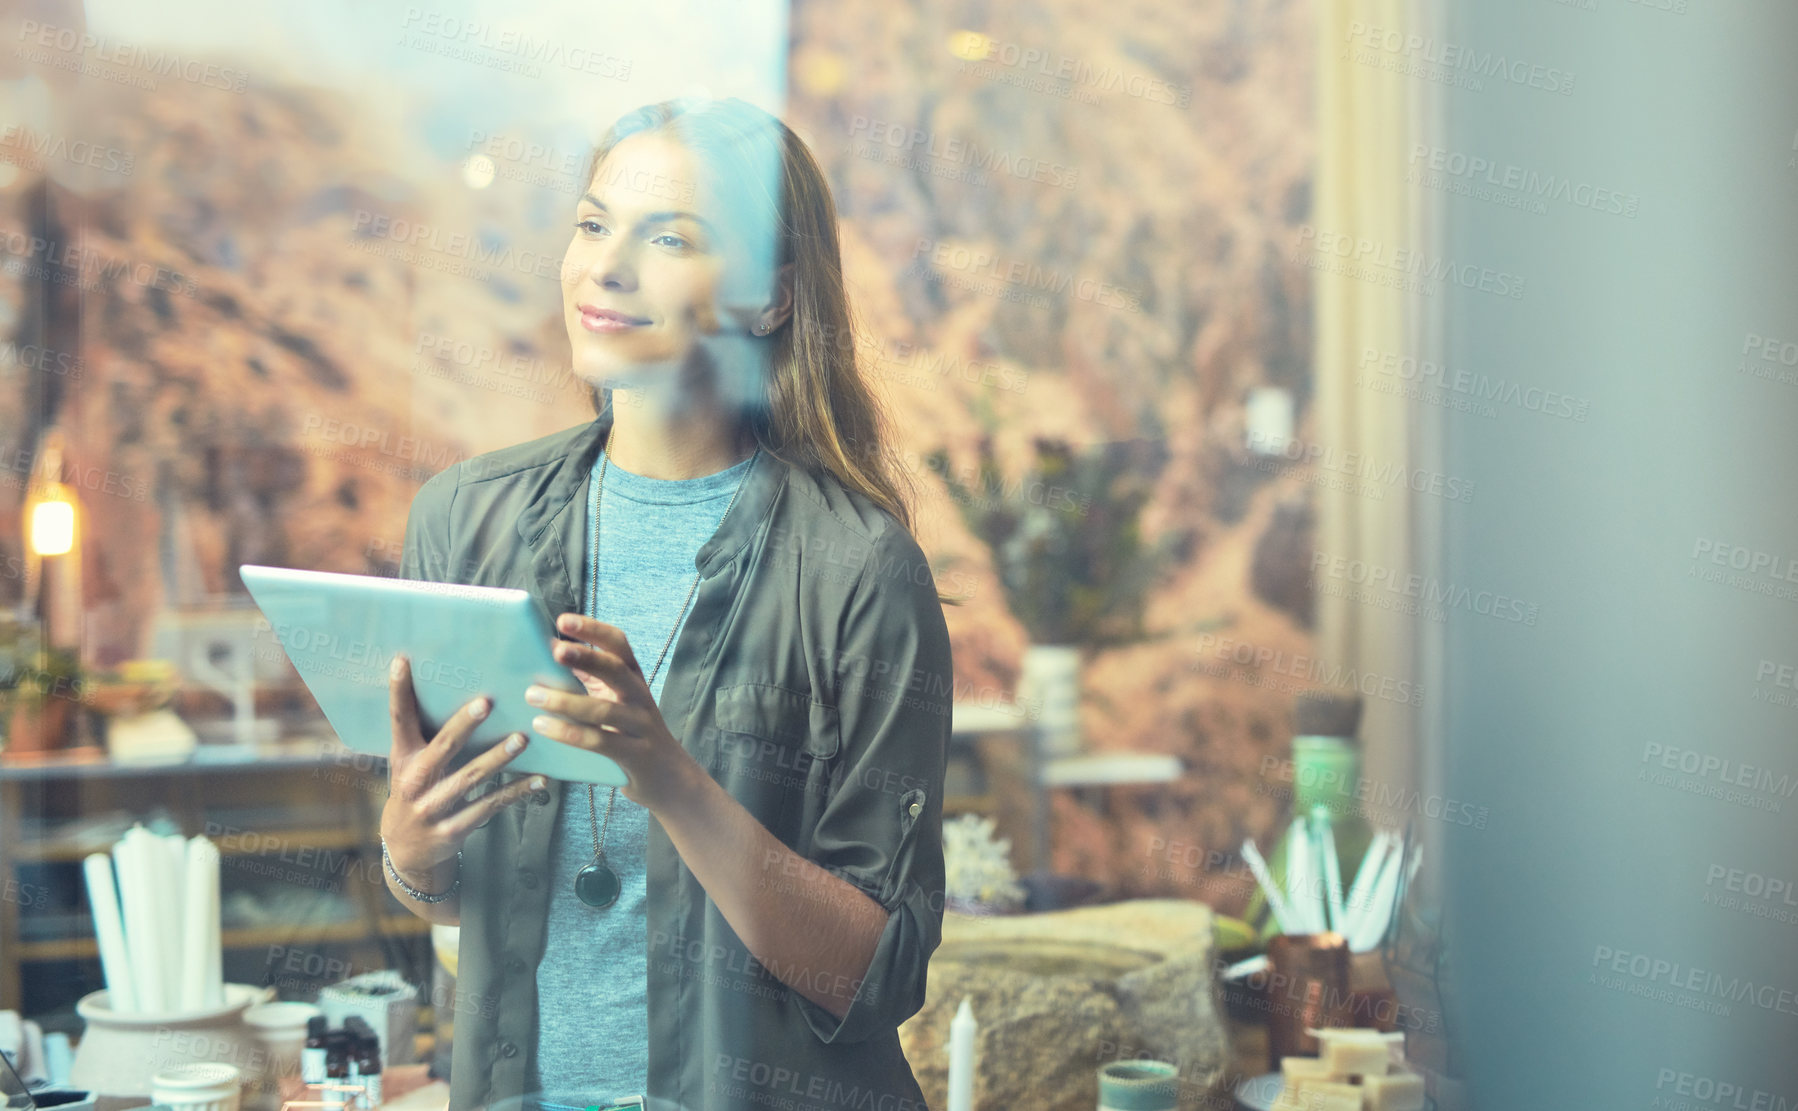 Buy stock photo Cropped shot of an attractive young female entrepreneur using a tablet in her store